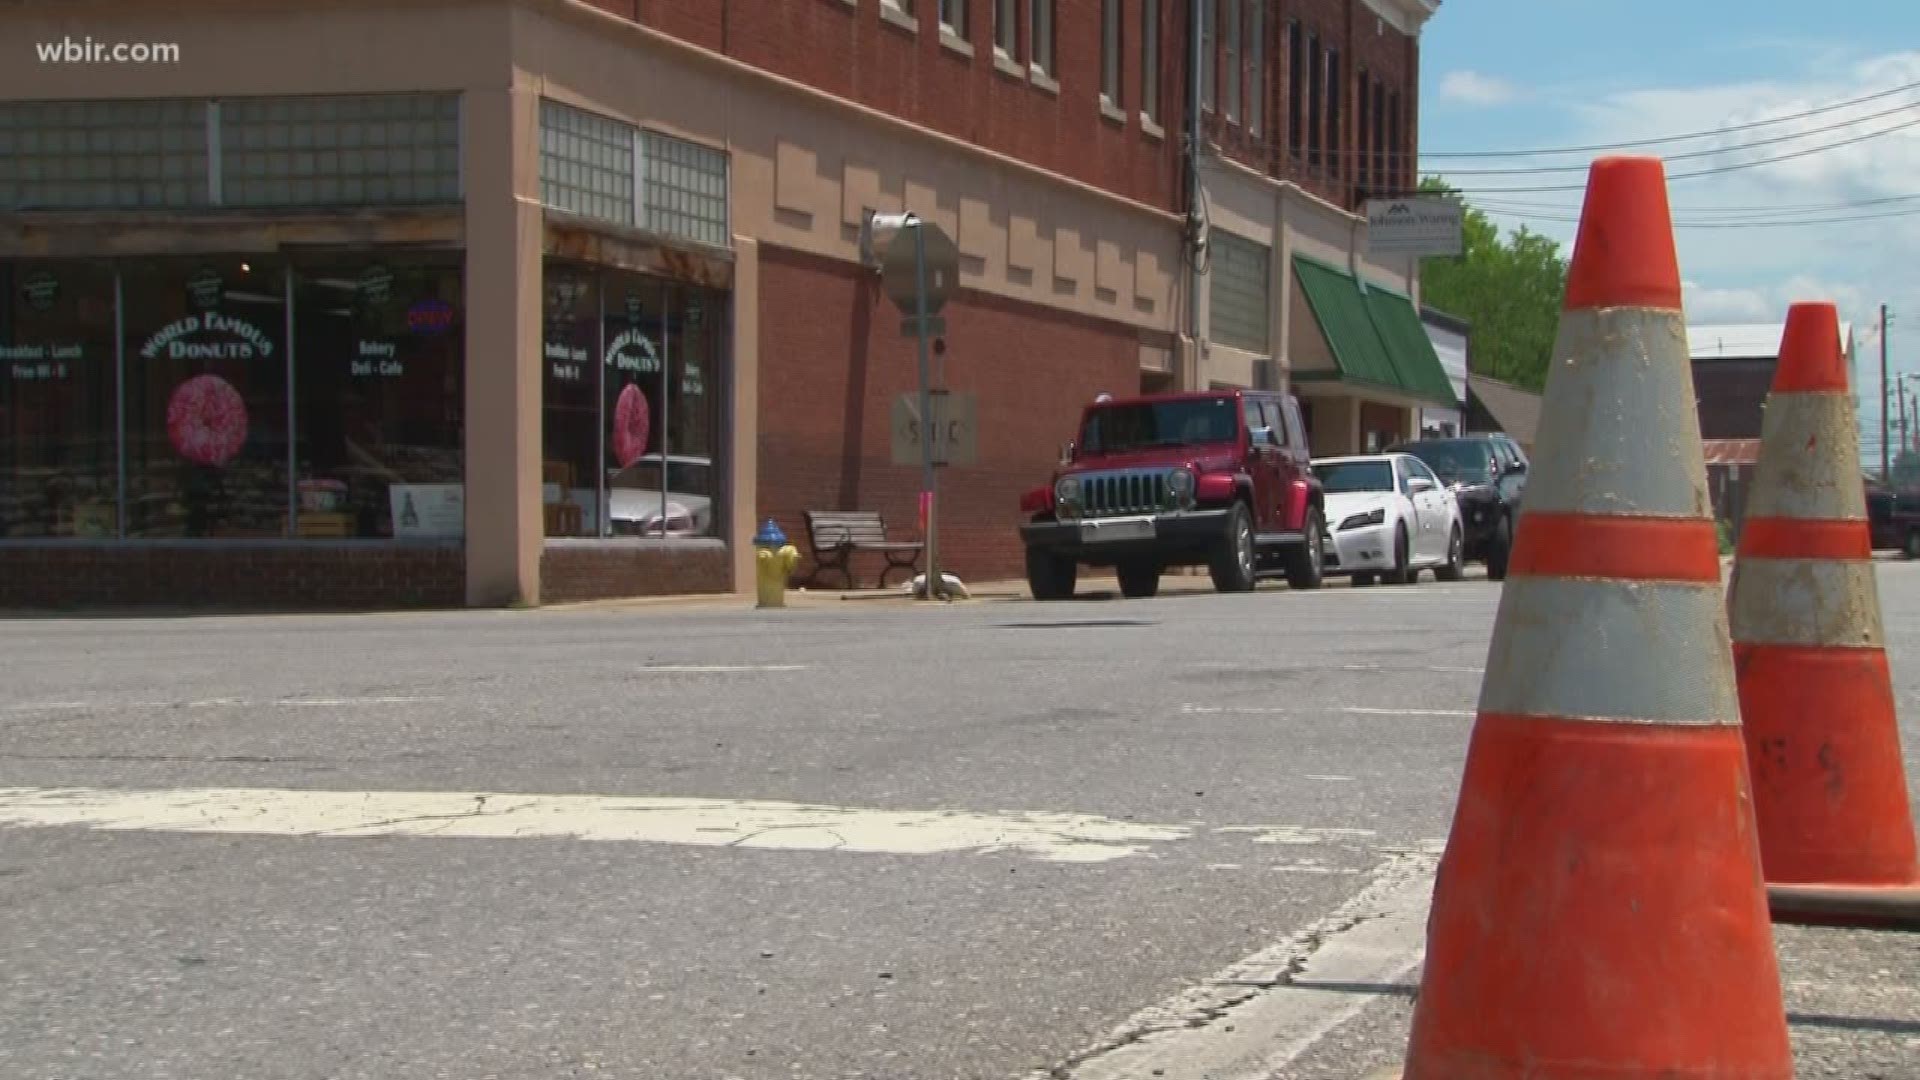 Sevierville is expecting major changes to its downtown in the next 18 months. The Downtown Streetscape project promises to bury power lines, expand sidewalks and renovate store fronts.